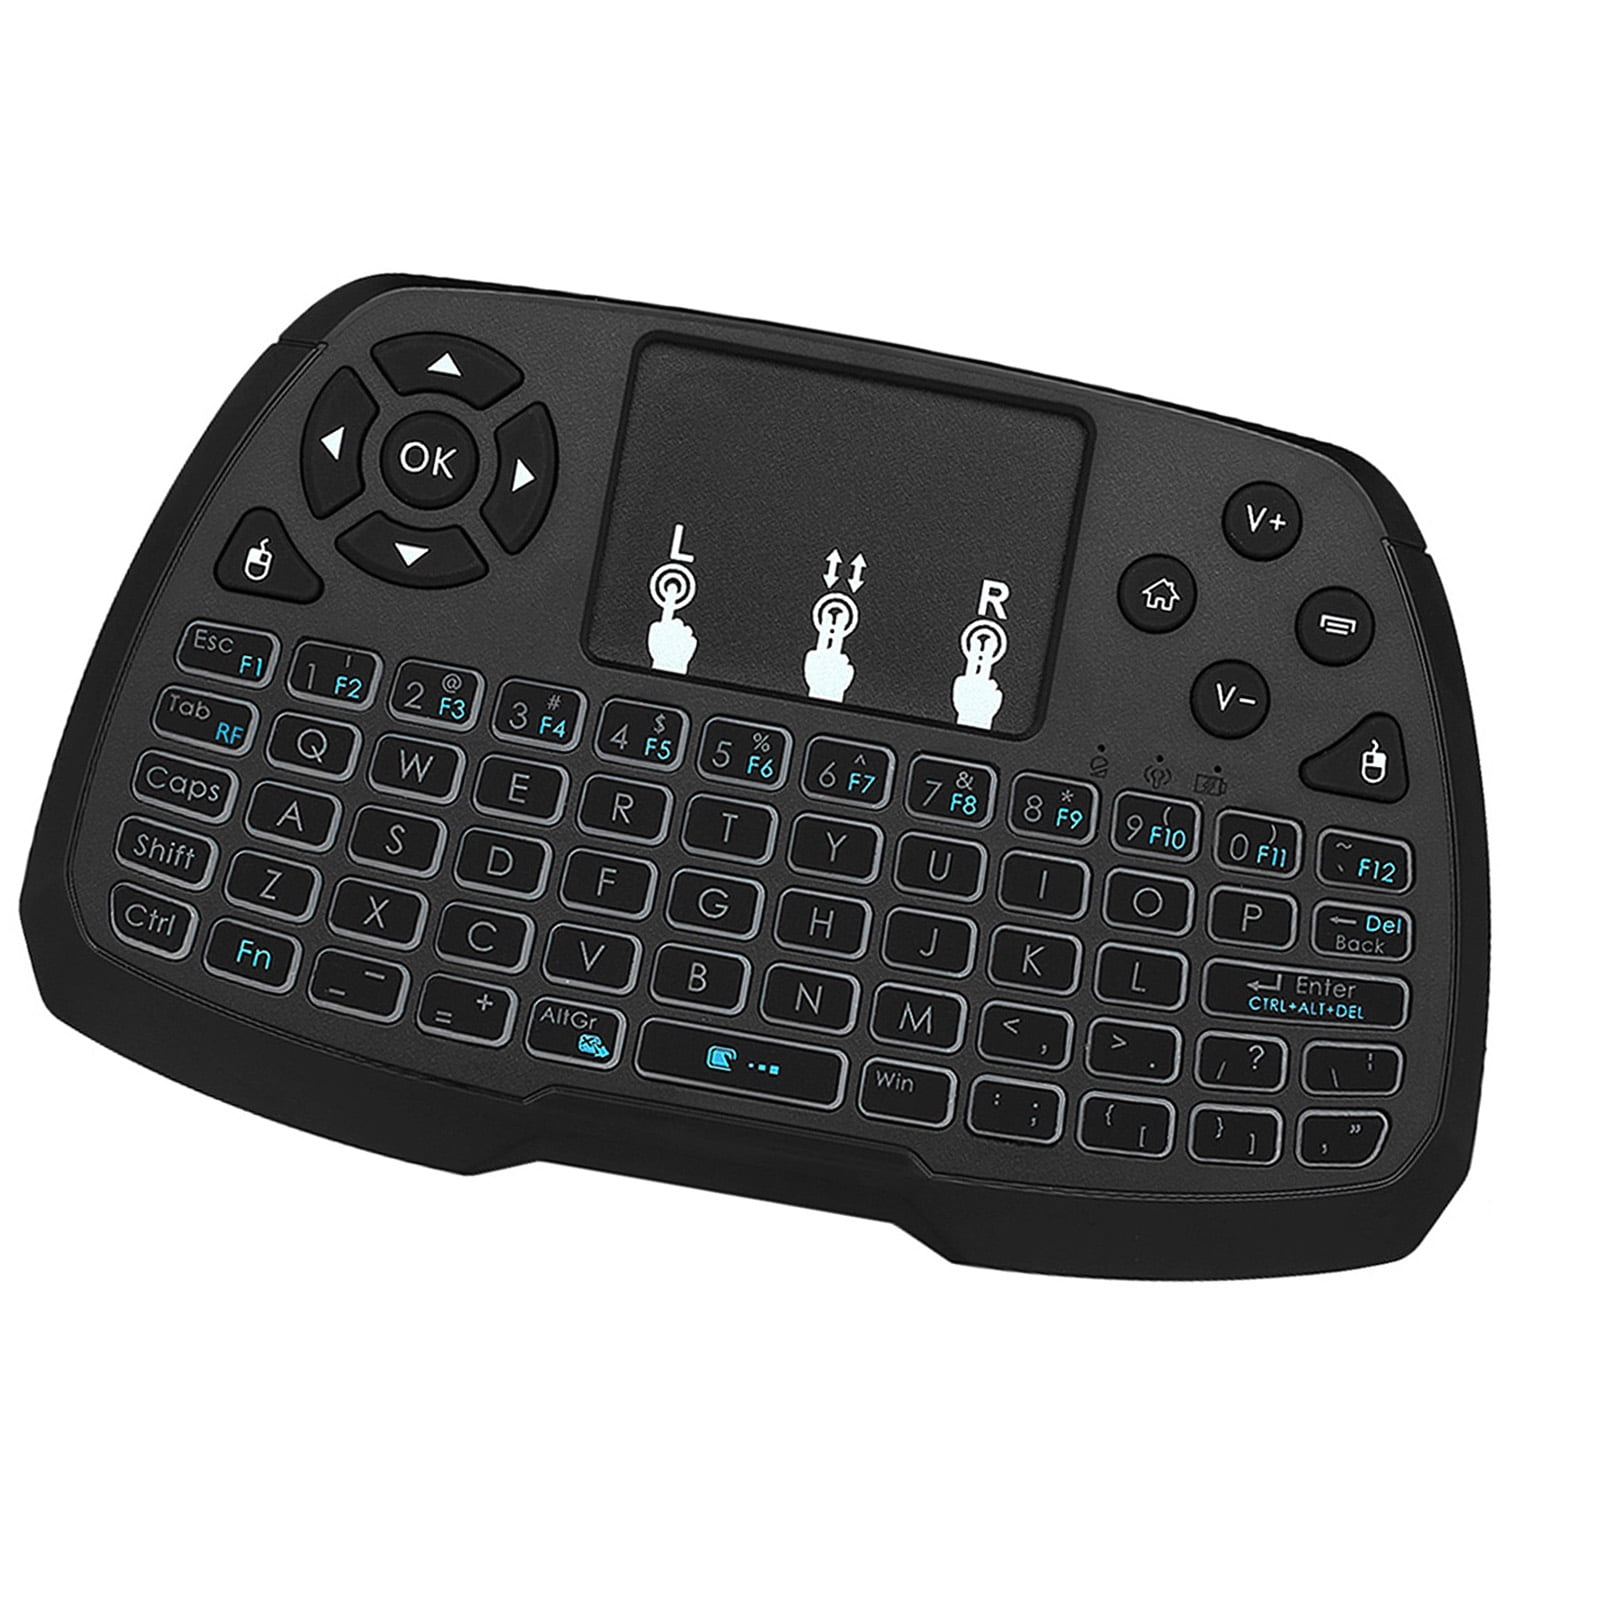 2021 Upgraded Mini Bluetooth Keyboard with Touchpad Backlit Handheld Keyboard with 2.4G USB Dongle for Android tv Box/Fire TV Stick/Smartphone/Laptop/Raspberry Pi and PC KP-21SM 